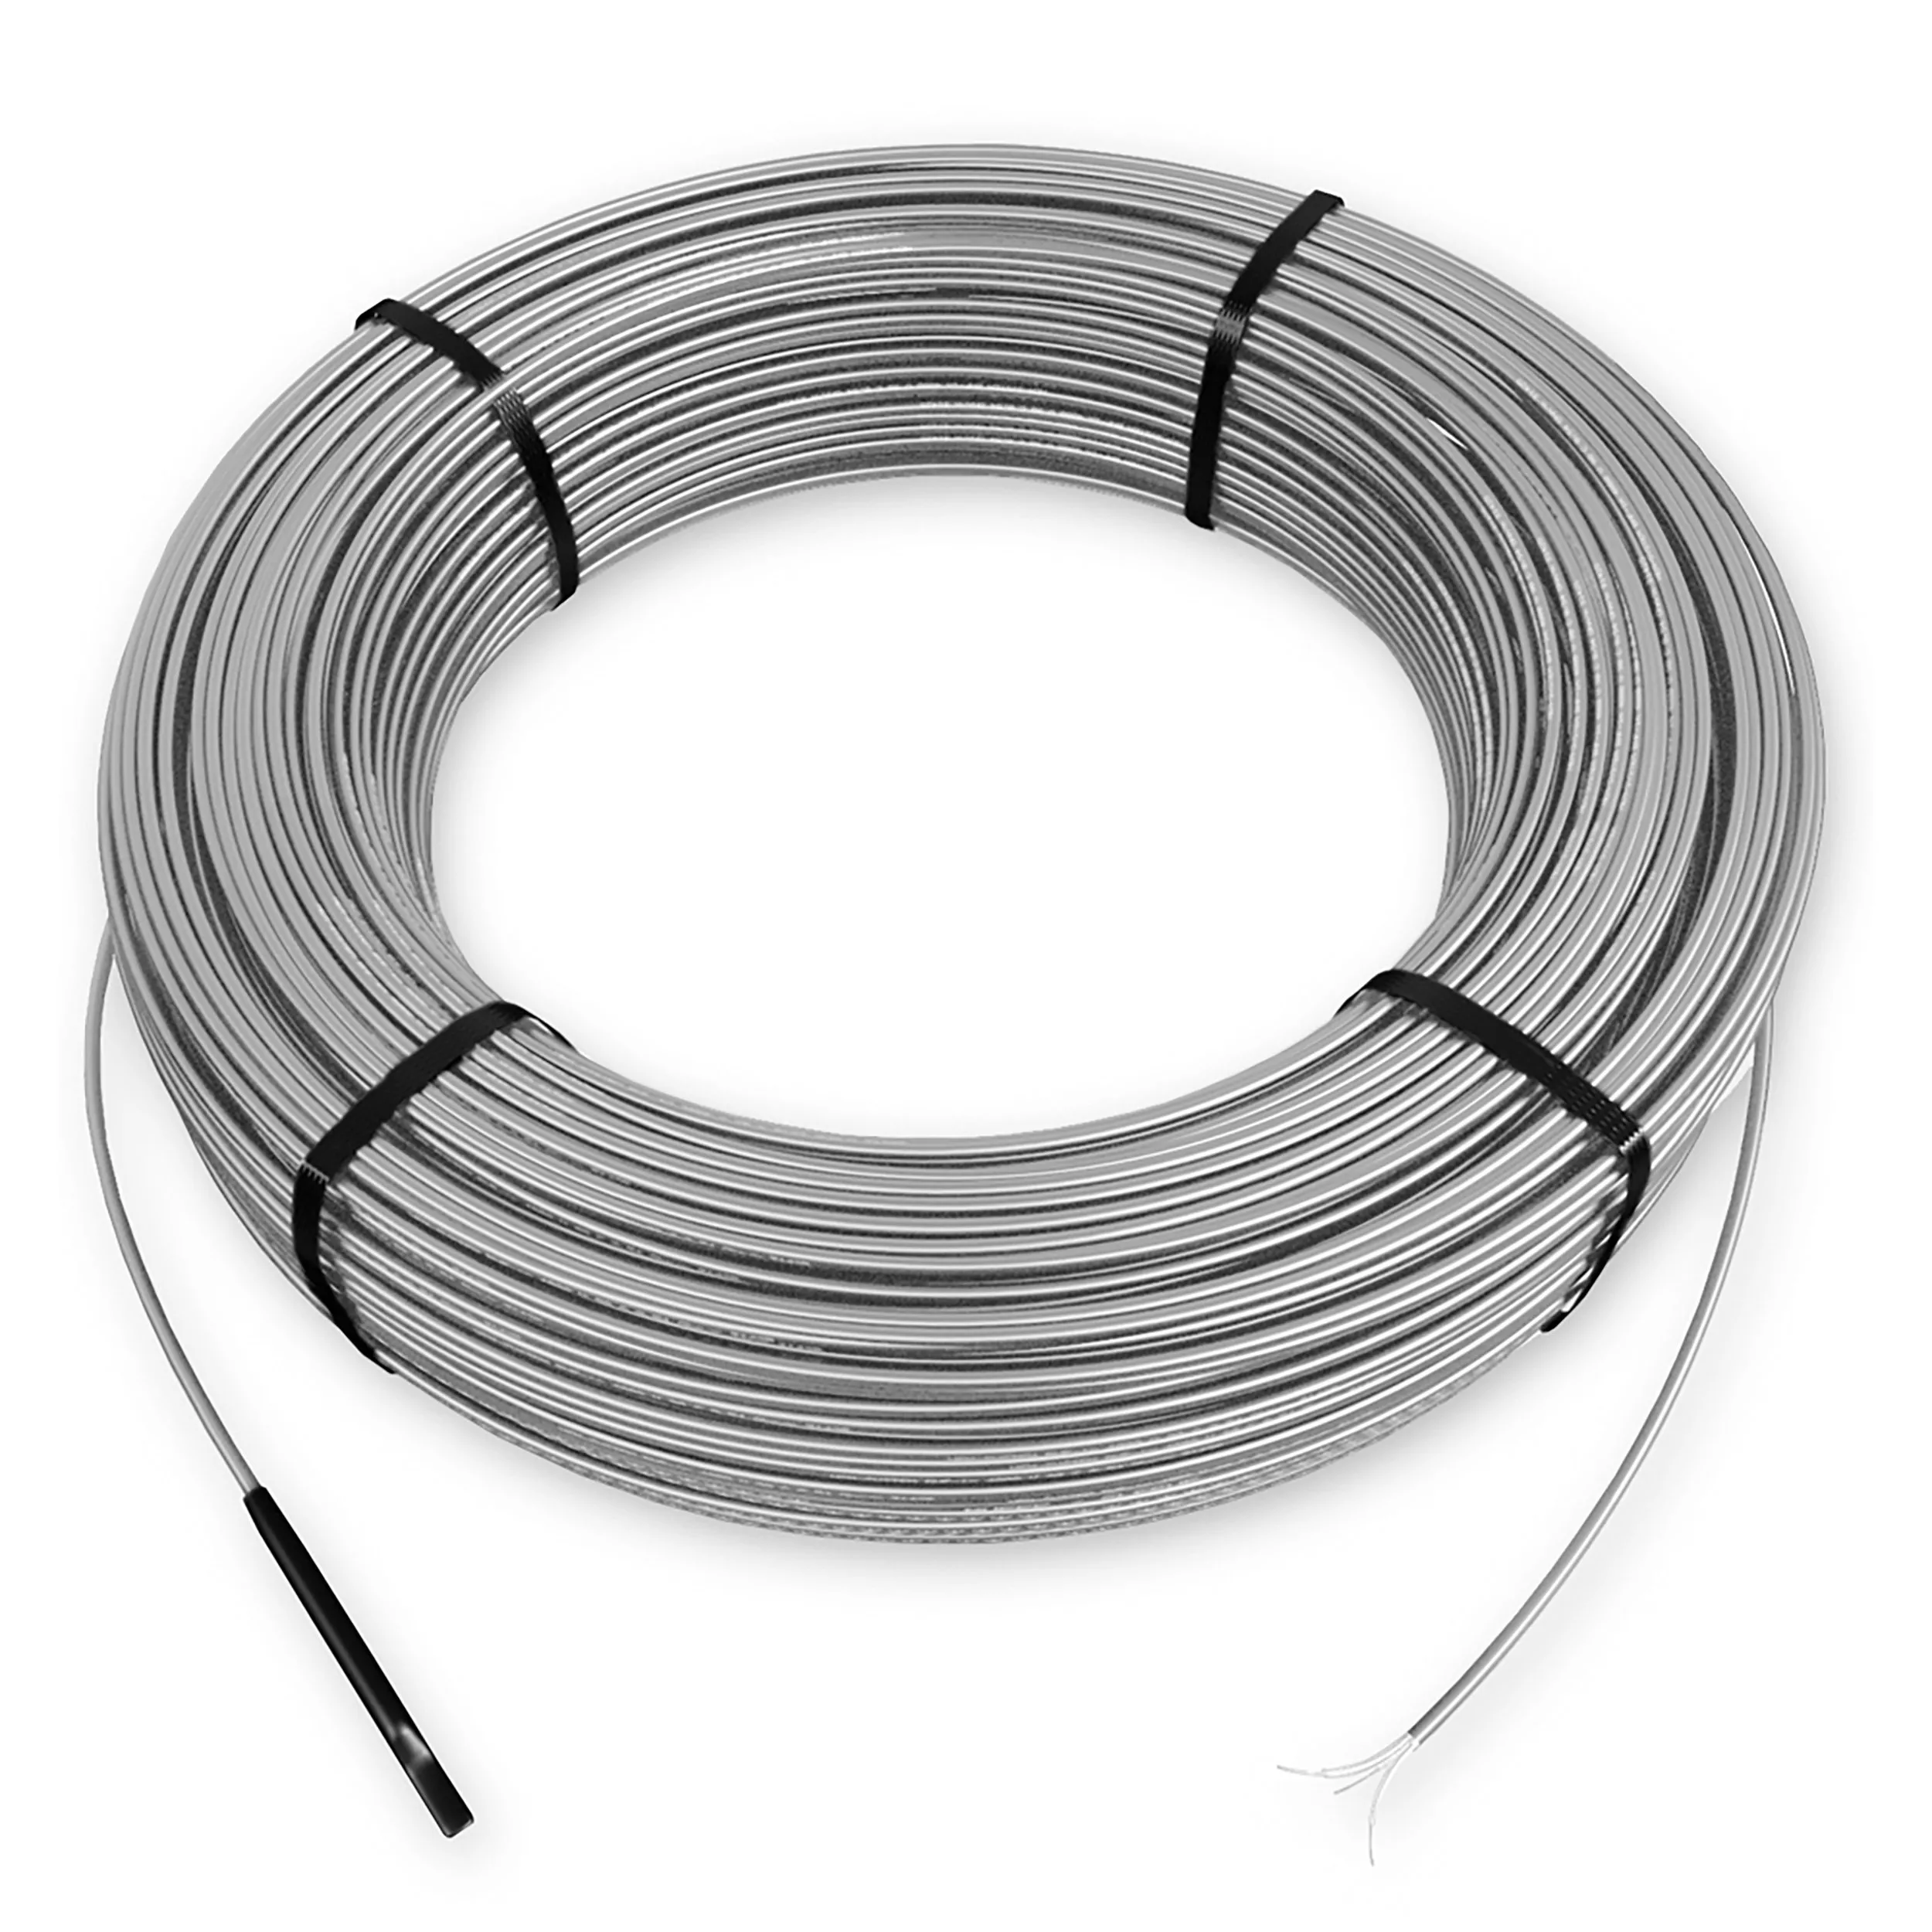 Schluter 101.9sqft. Ditra Heat 120V Heating Cable